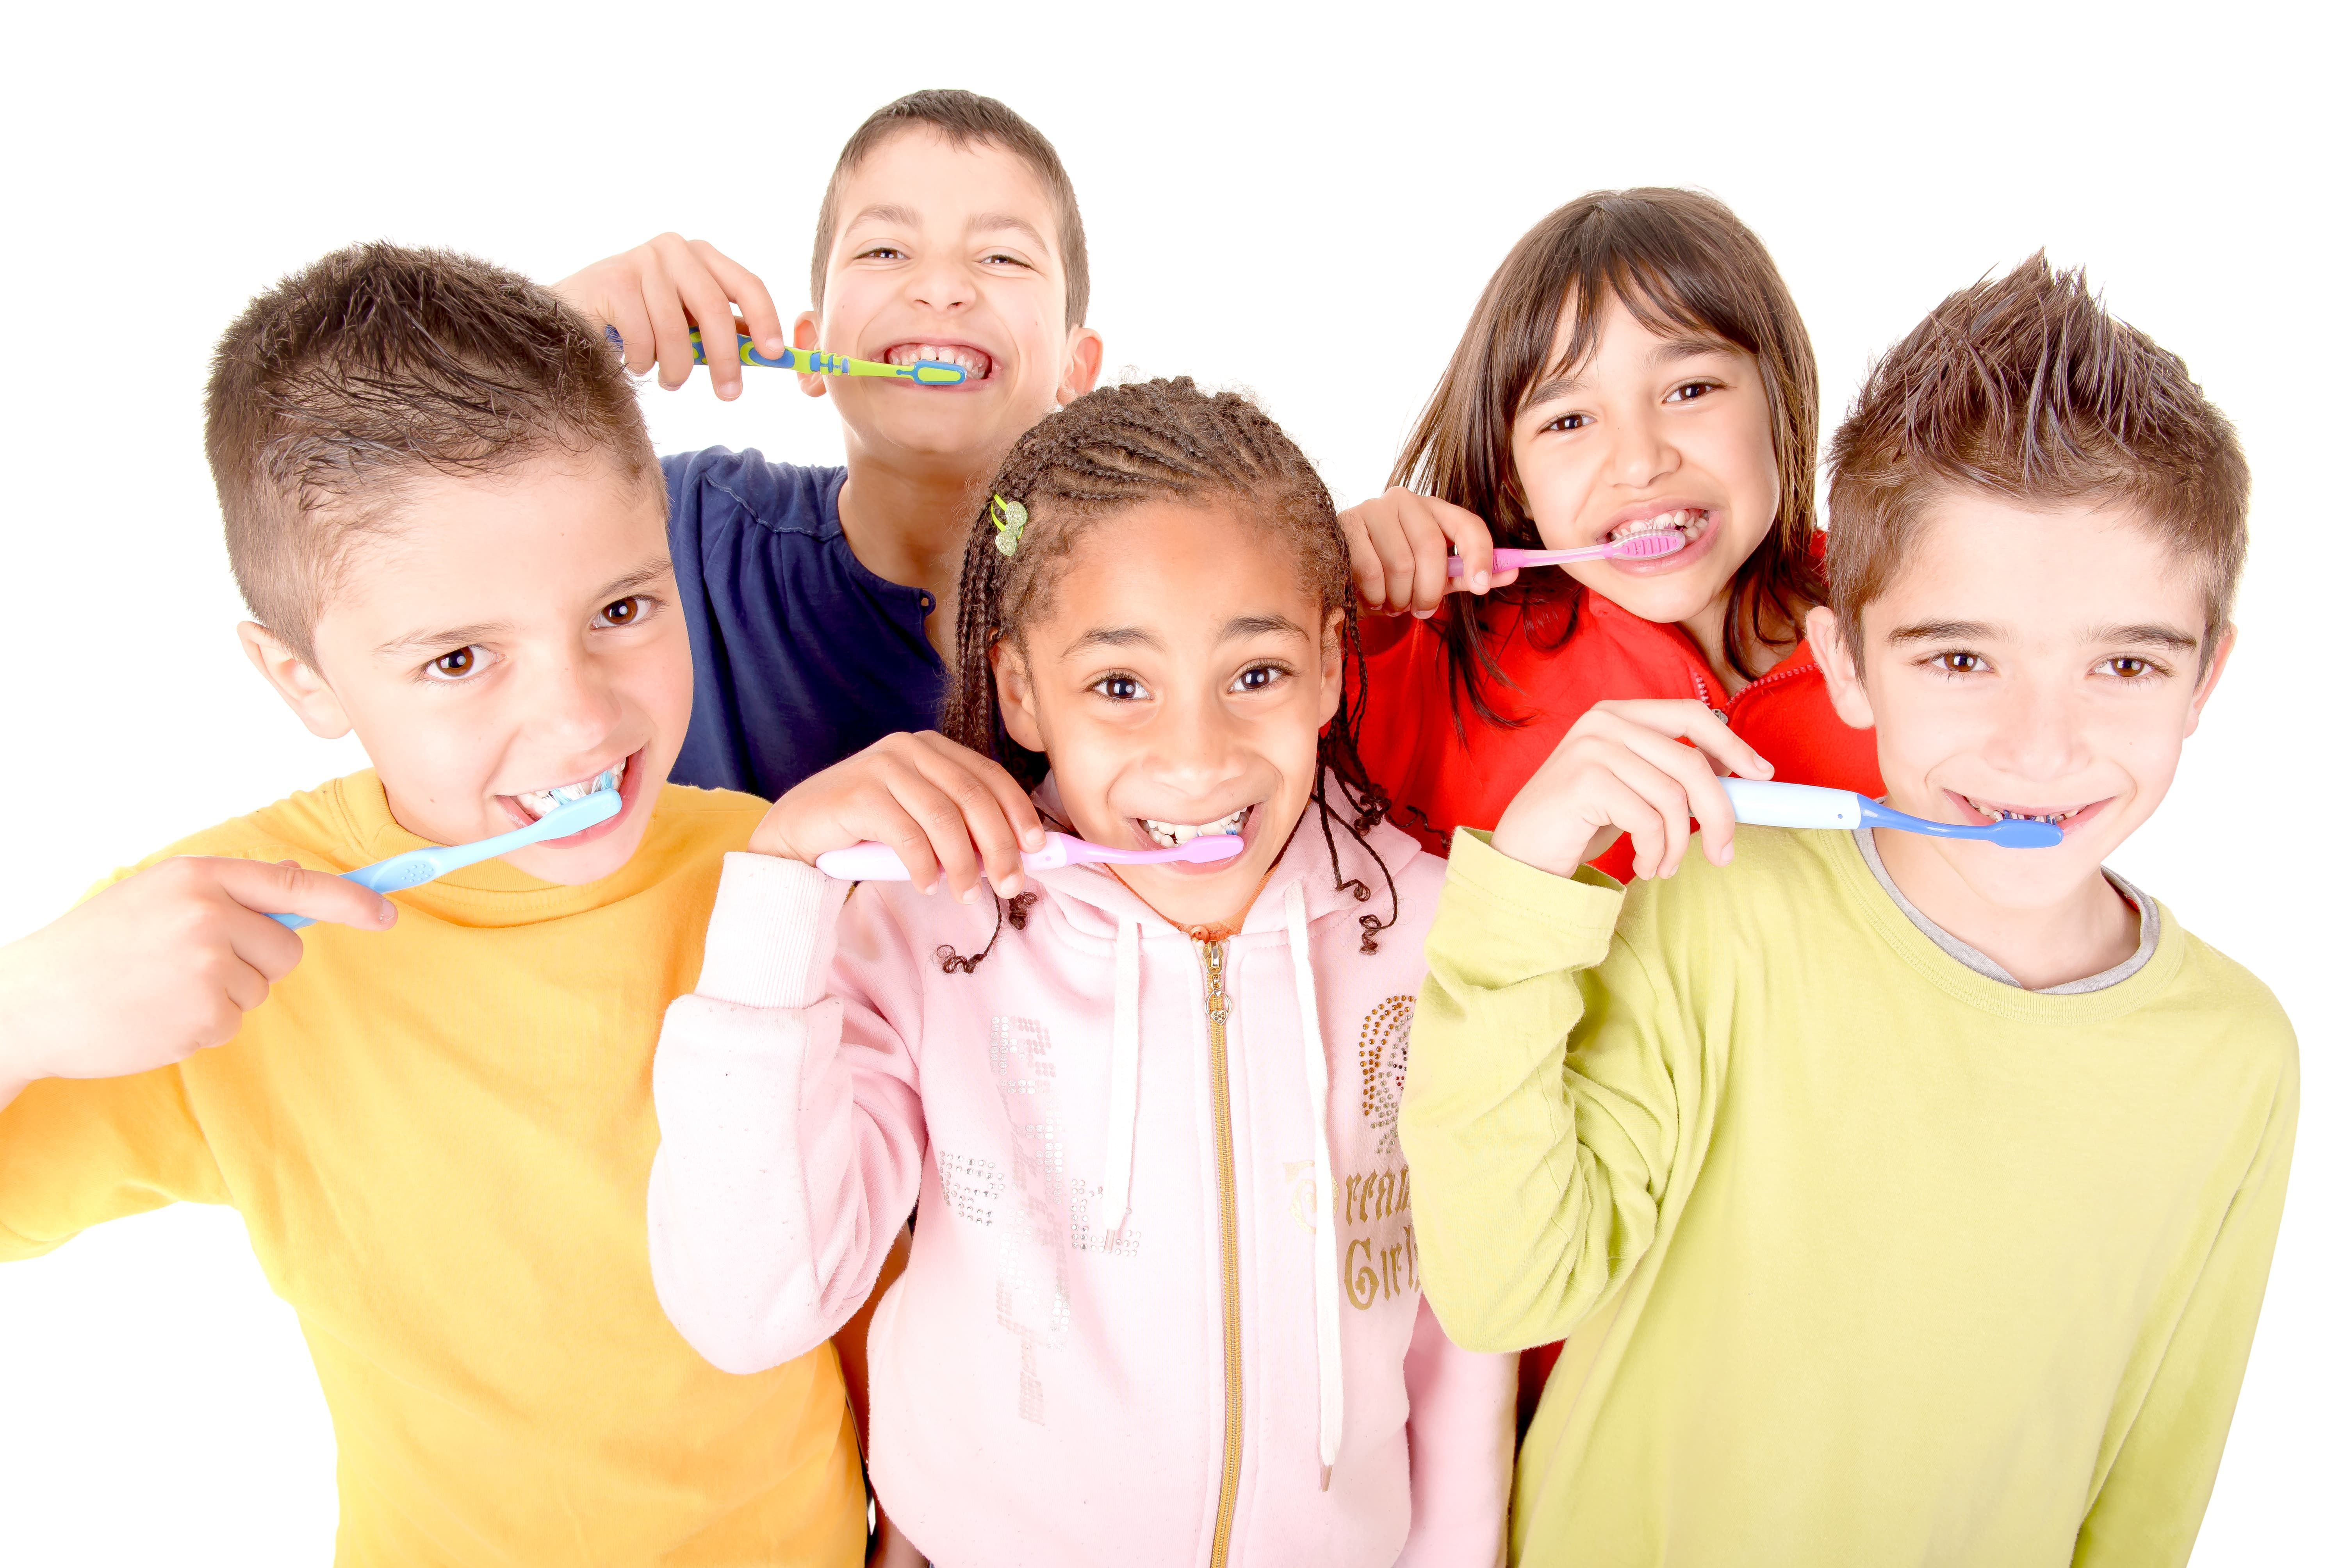 A group of five kids brushing their teeth